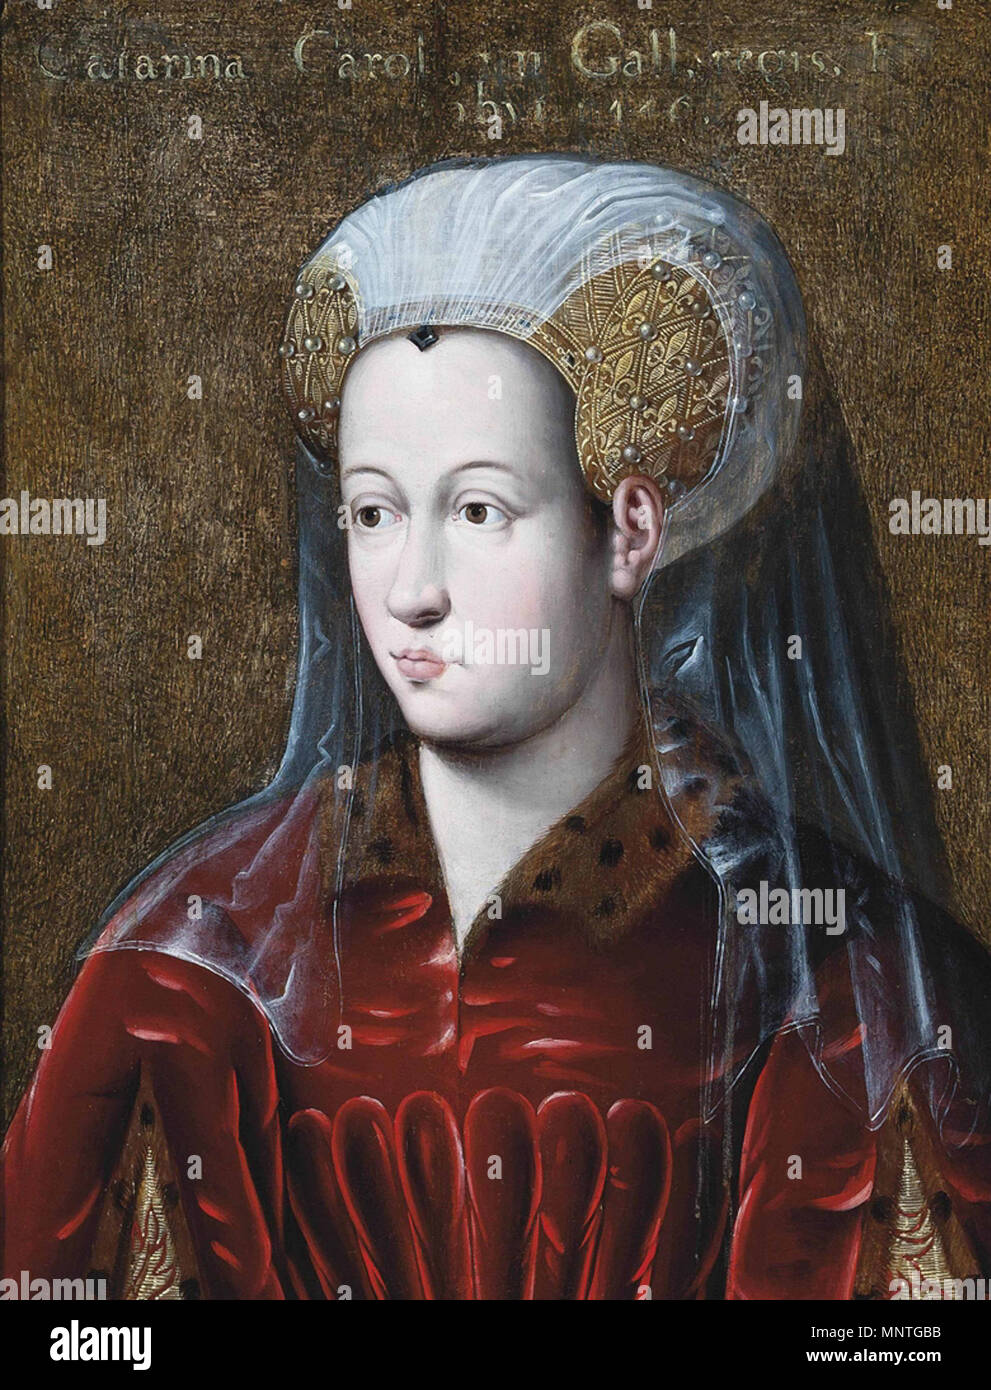 Portrait of Catherine of Valois (or Catherine of France), Countess of Charolais .  English: Portrait of Catherine of Valois (or Catherine of France) (died 1446), Countess of Charolais (daughter of King Charles VII of France and Marie of Anjou, wife of Charles of Burgundy, count of Charolais (future duke Charles the Bold), bust-length, in a red fur-trimmed mantle and a richly embroidered headpiece with a white veil Français : Portrait de Catherine de France (ou Catherine de Valois) (morte en 1446), comtesse de Charolais, fille du roi Charles VII de France et de Marie d'Anjou, première épouse de Stock Photo